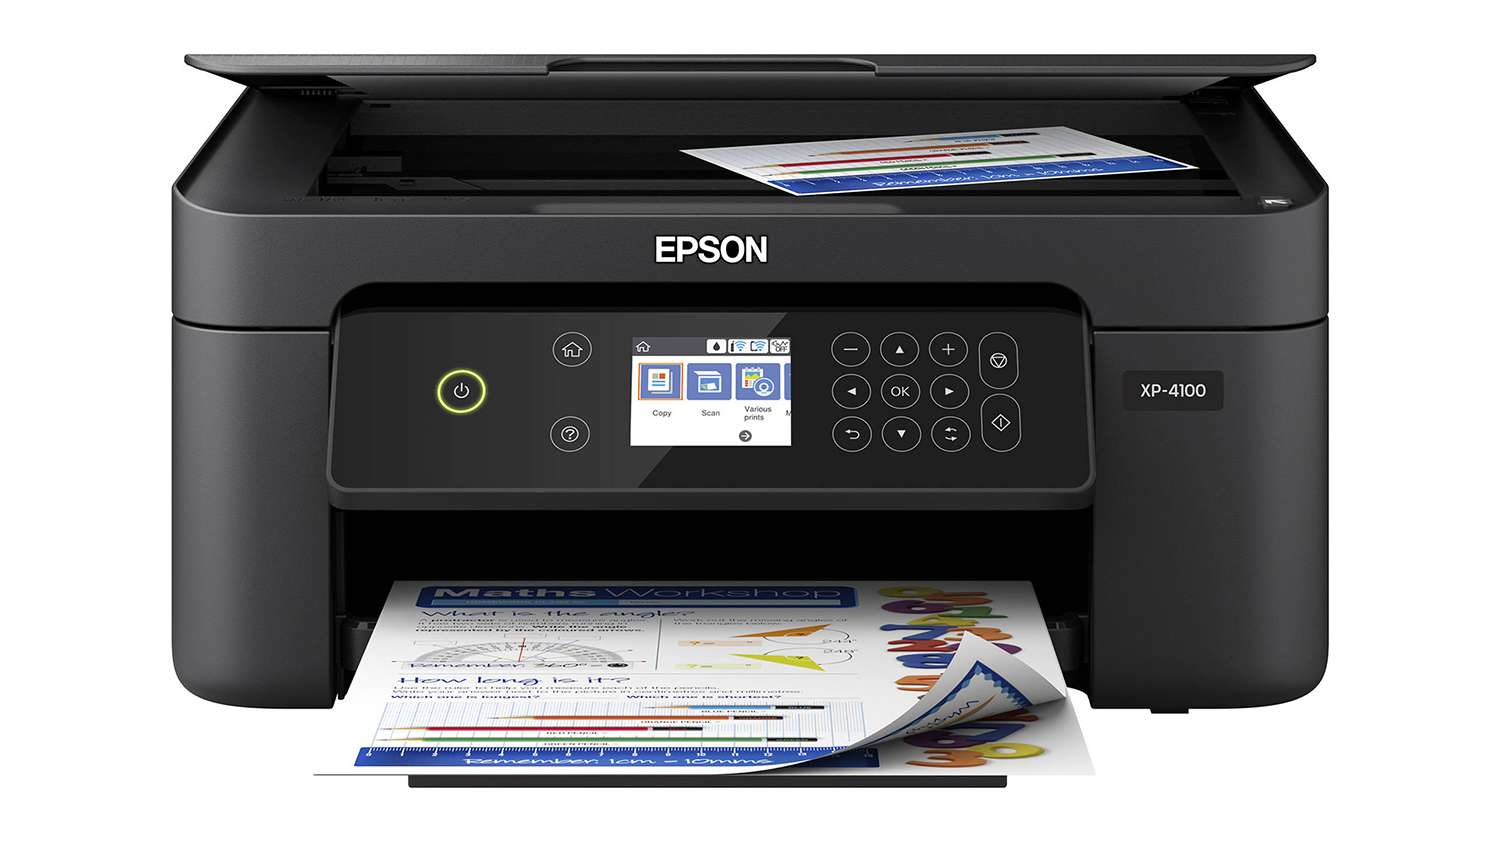 epson event manager software for scanning